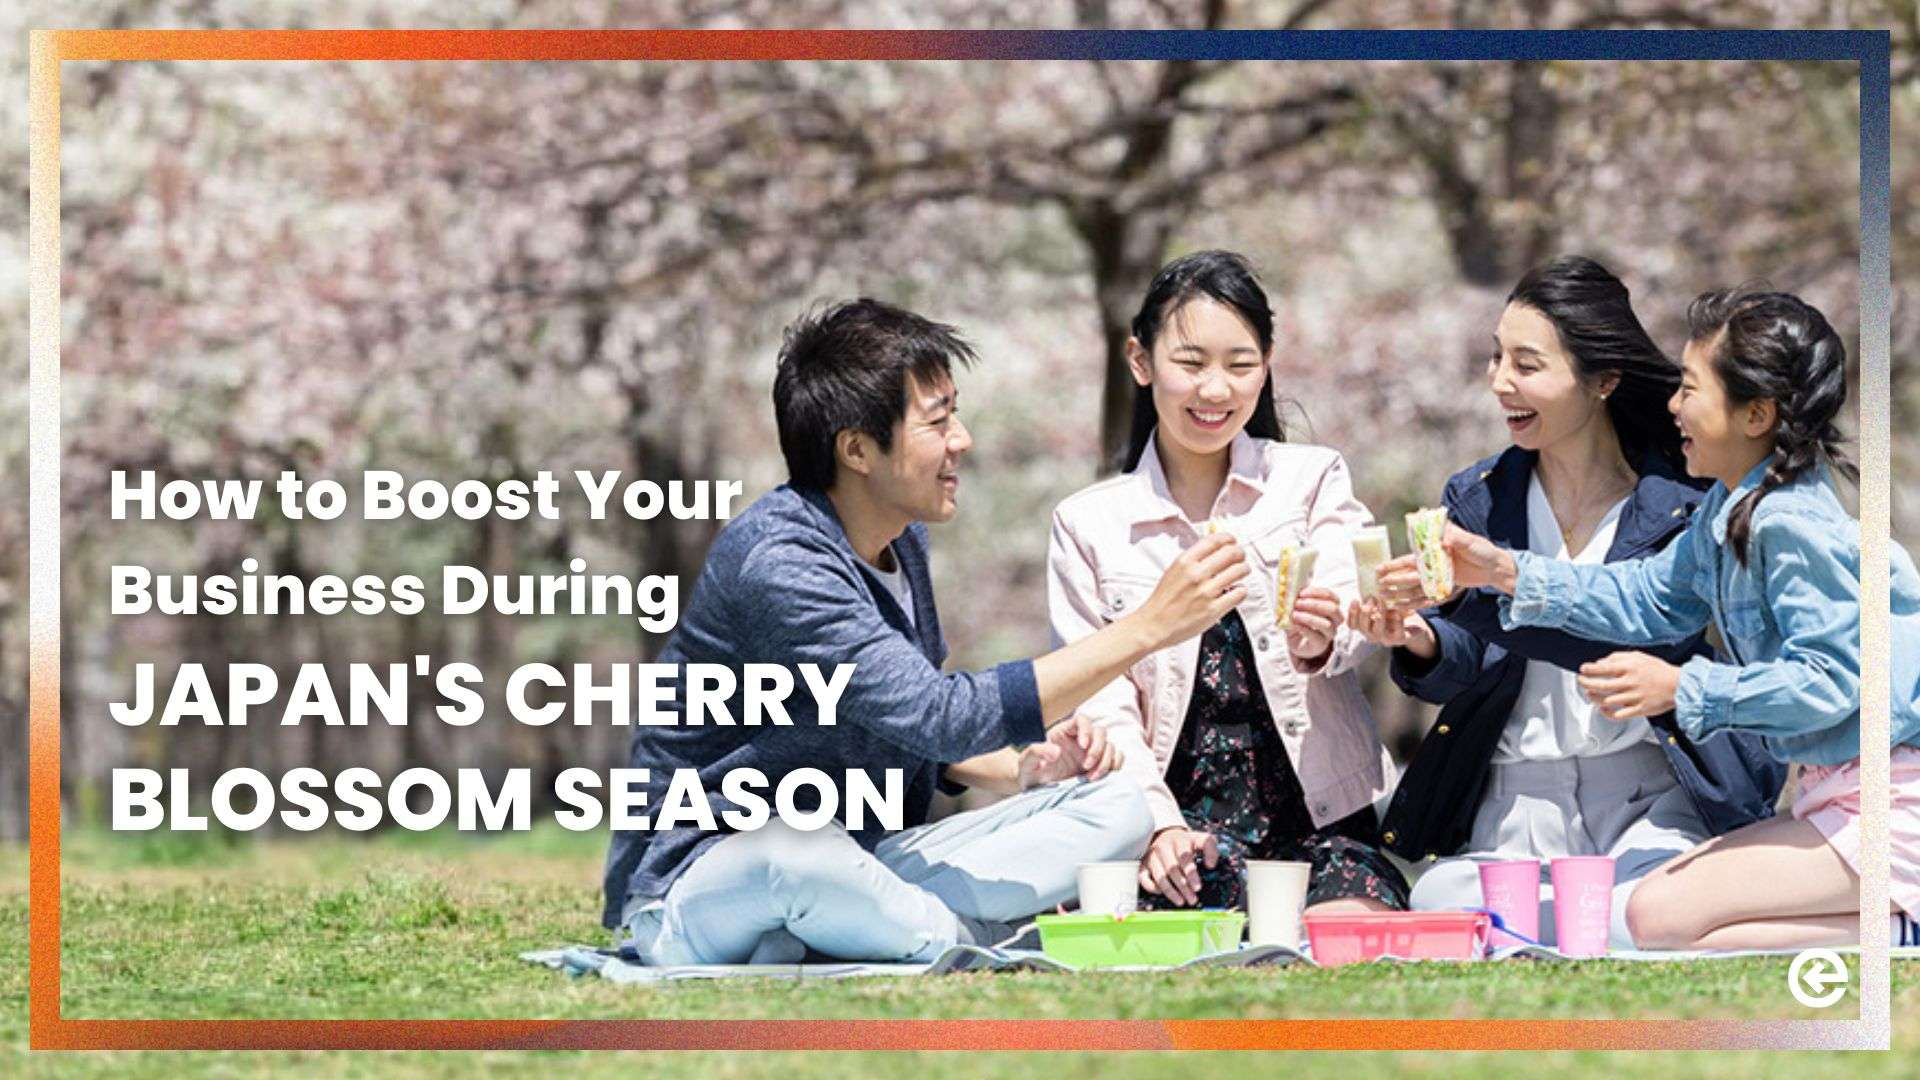 How to Boost Your Business during Japan’s Cherry Blossom Season?